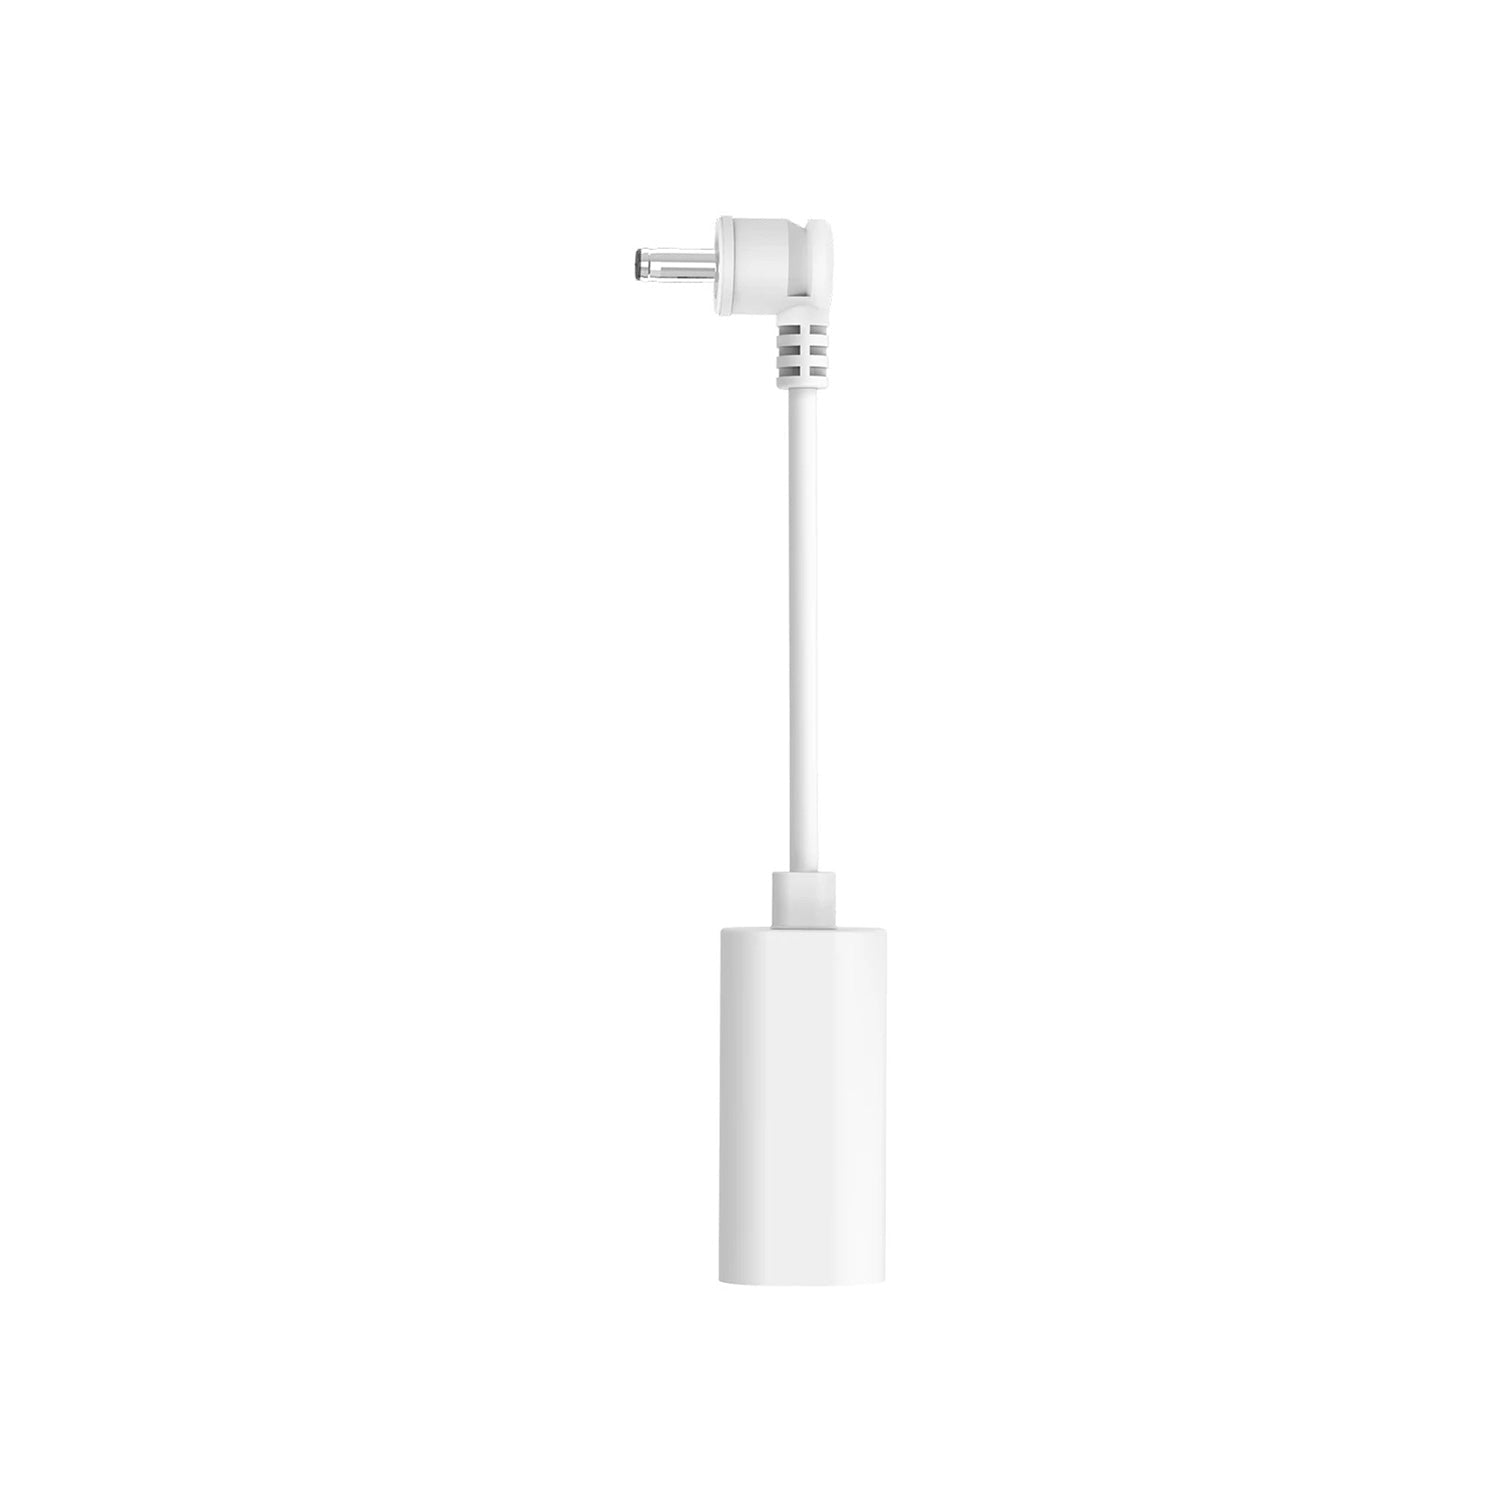 USB-C to Barrel Plug Adapter (for USB-C Solar Panels and Barrel Plug Security Cams) - White